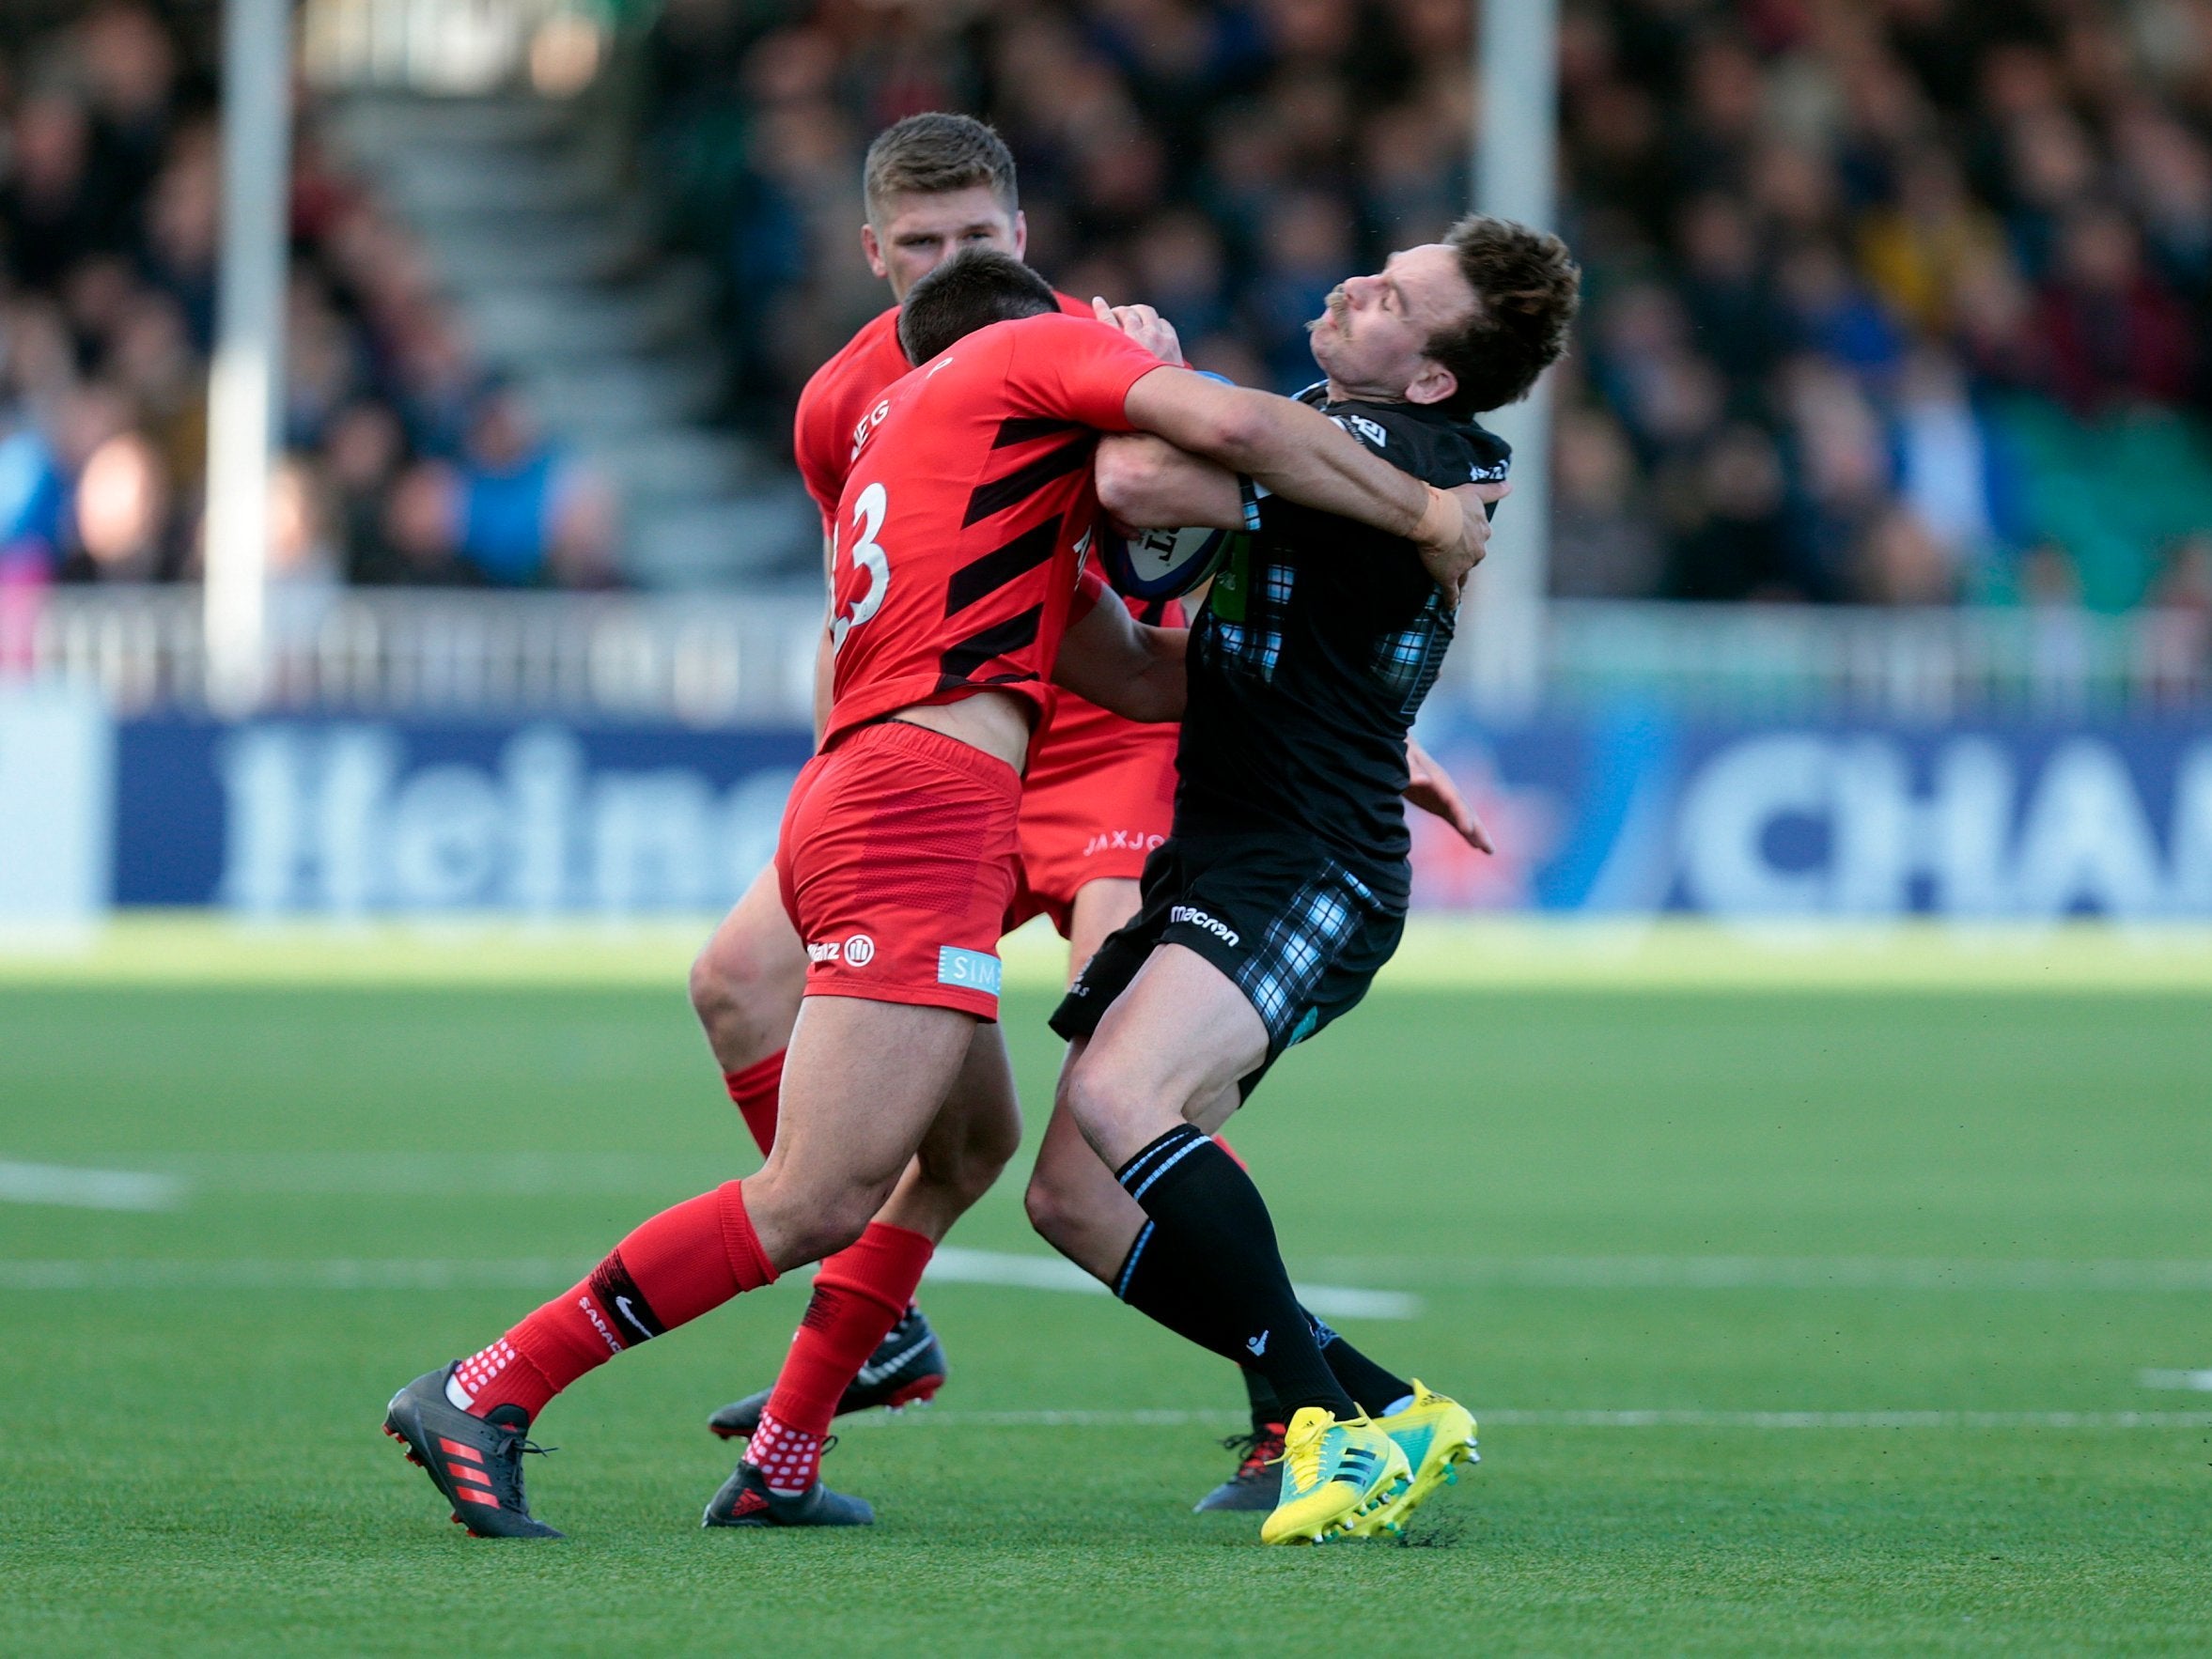 Lozowski was banned for a dangerous tackle on Glasgow full-back Jackson